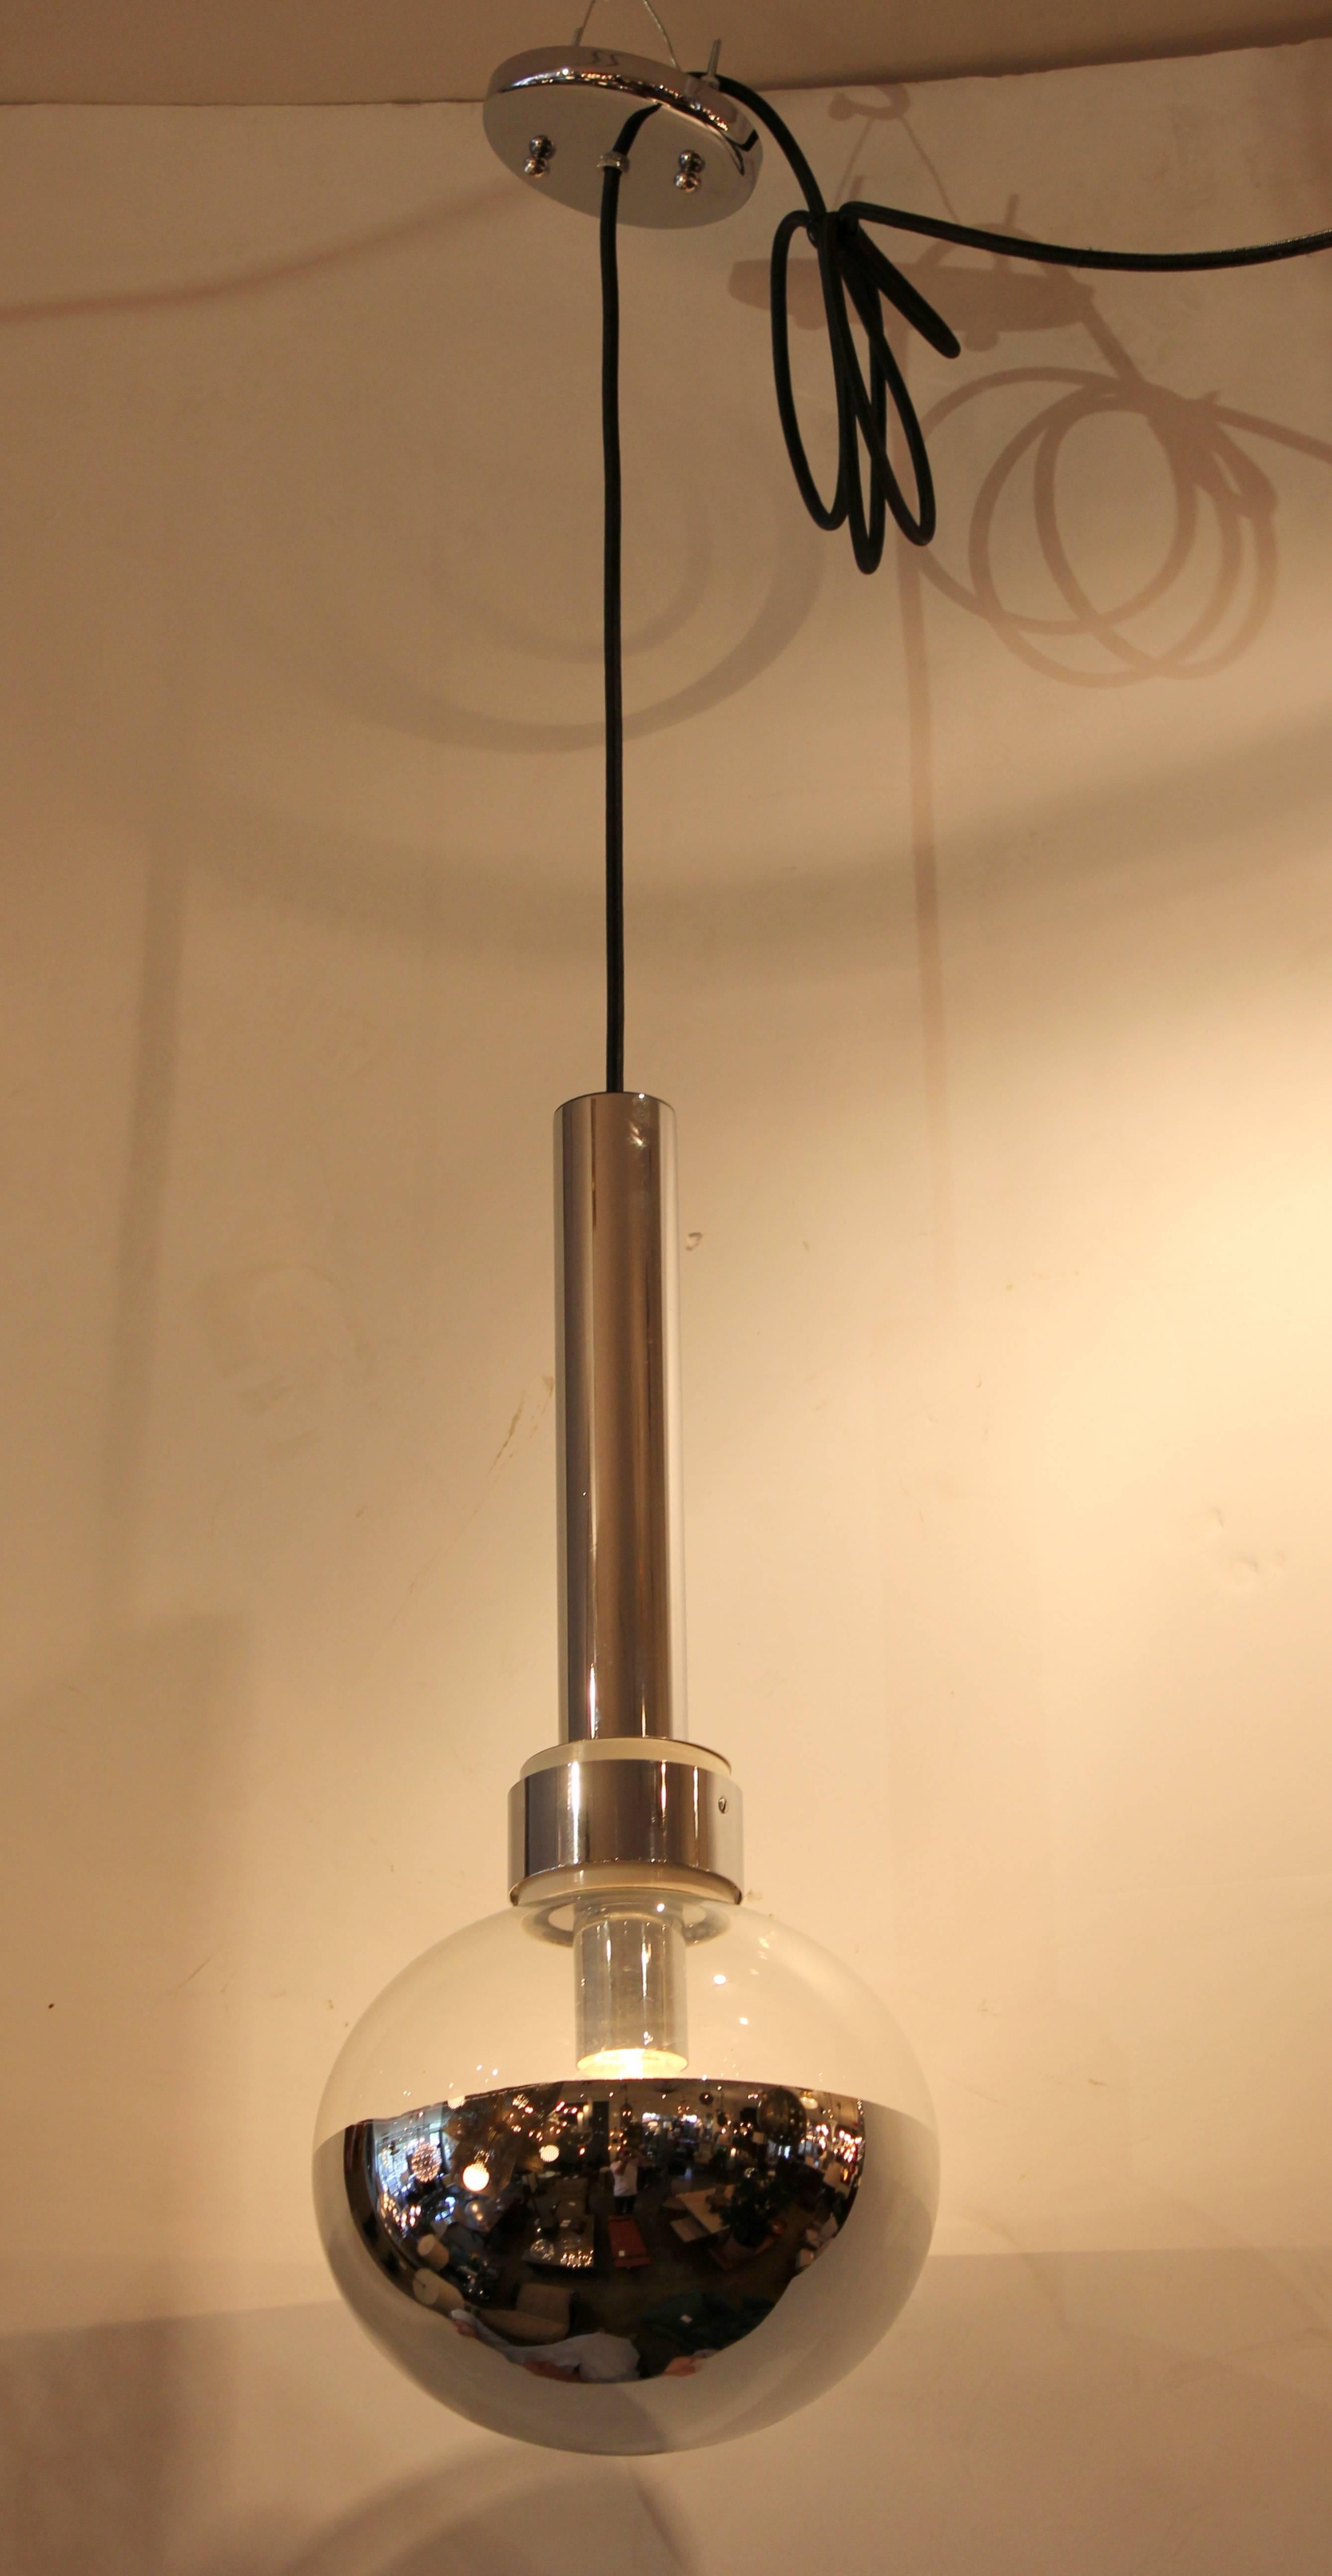 Chrome and Mecury Glass Pendants, circa 1960s, Italy
Maker unknown.  Rewired.